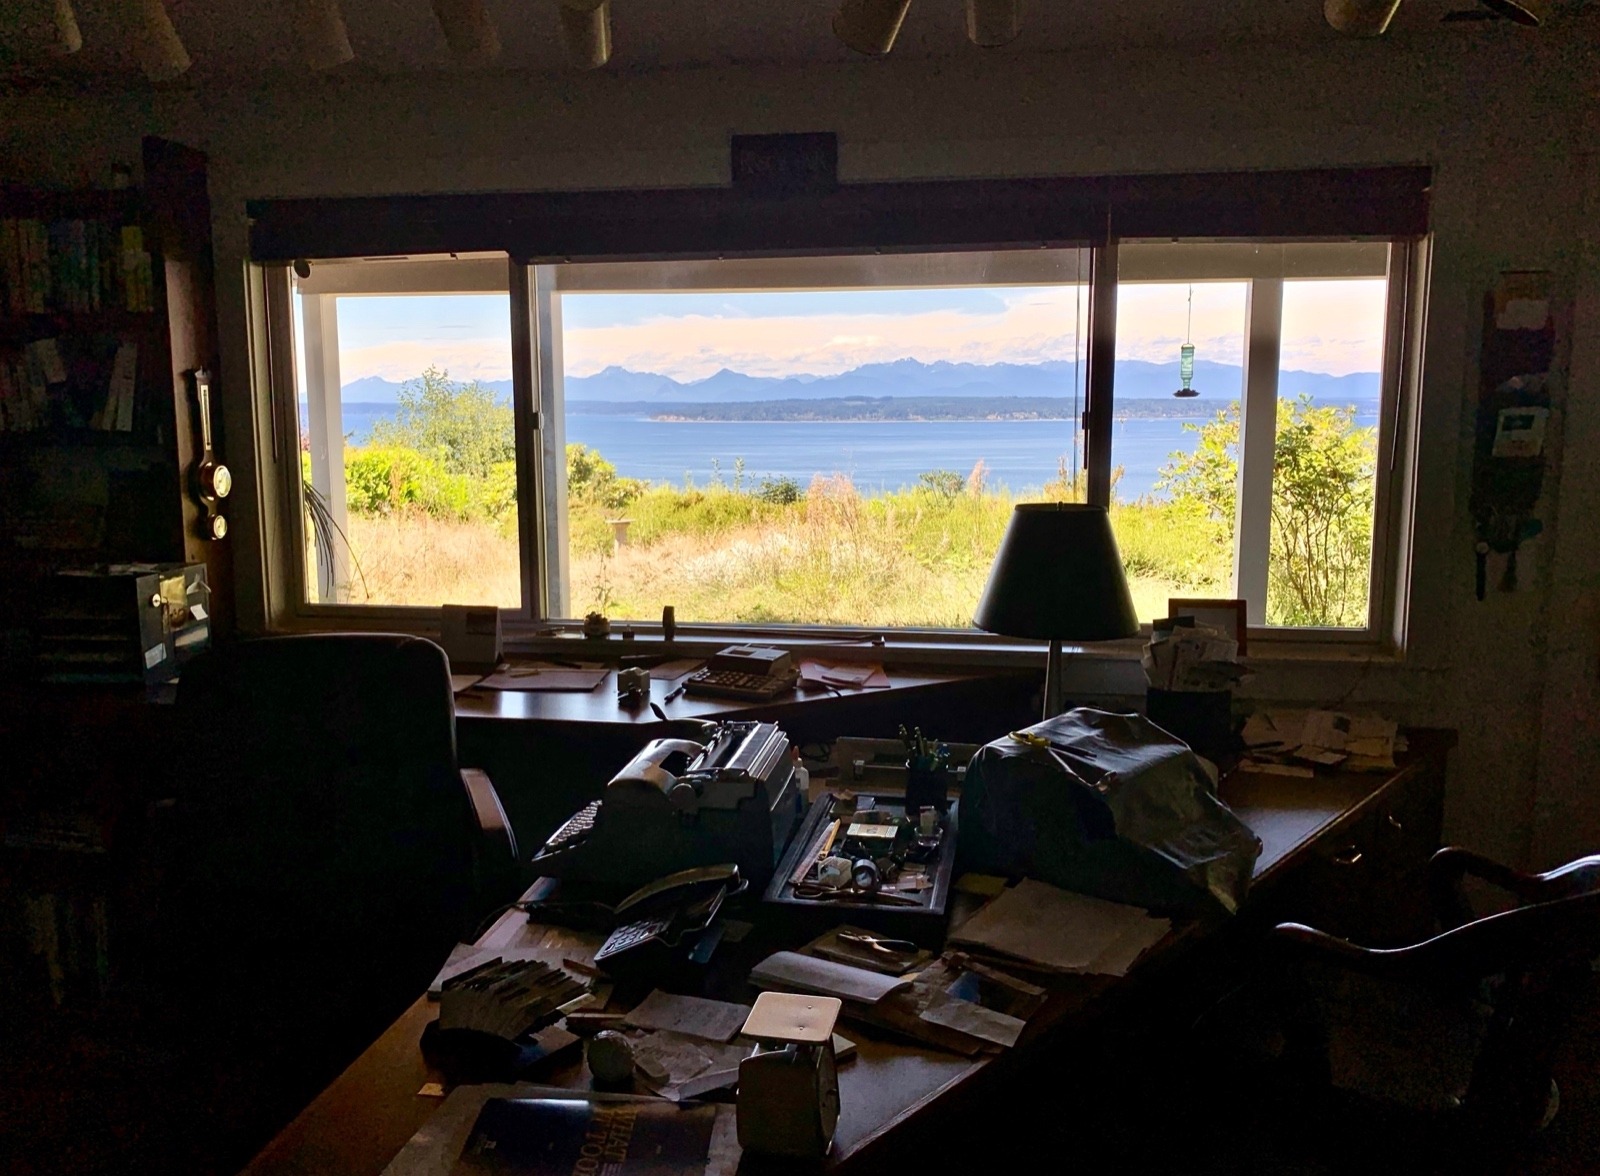 Doig's writing space as it appeared in early August 2019 four years after his passing. Not much has changed. The views of Puget Sound and the Olympic Mountains outside his window remain as inspiring as ever.  Photo by Todd Wilkinson